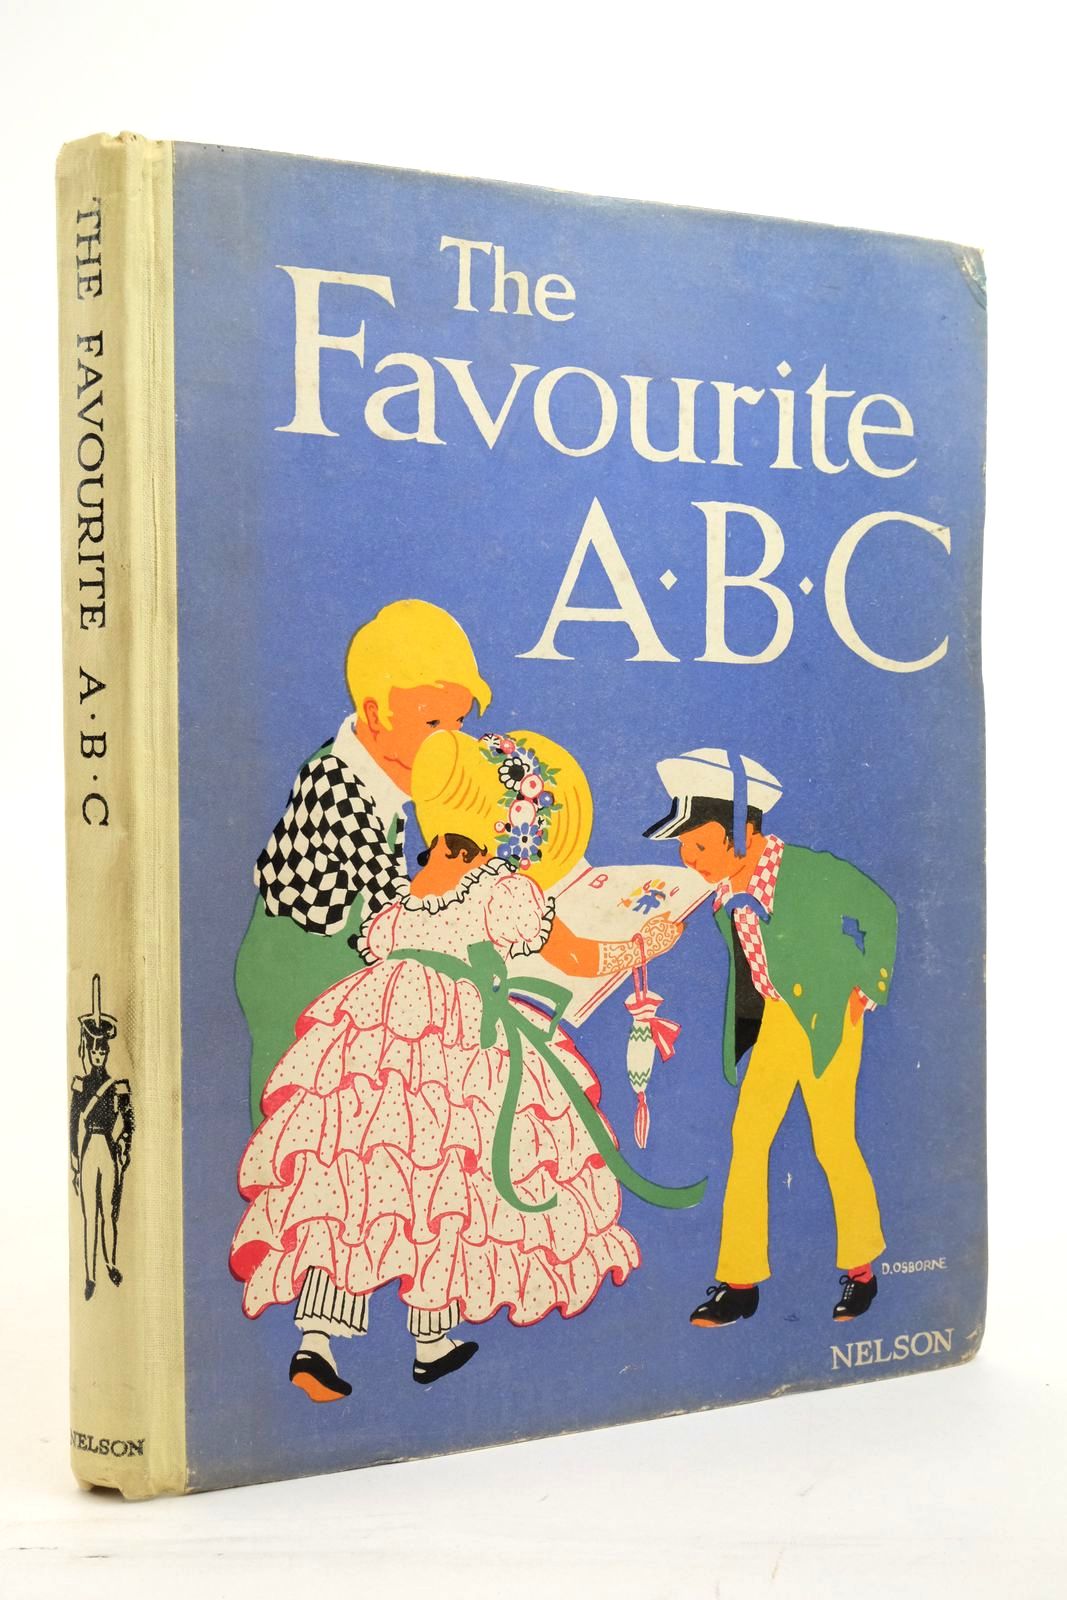 Photo of THE FAVOURITE ABC illustrated by Osborne, D. published by Nelson (STOCK CODE: 2137483)  for sale by Stella & Rose's Books